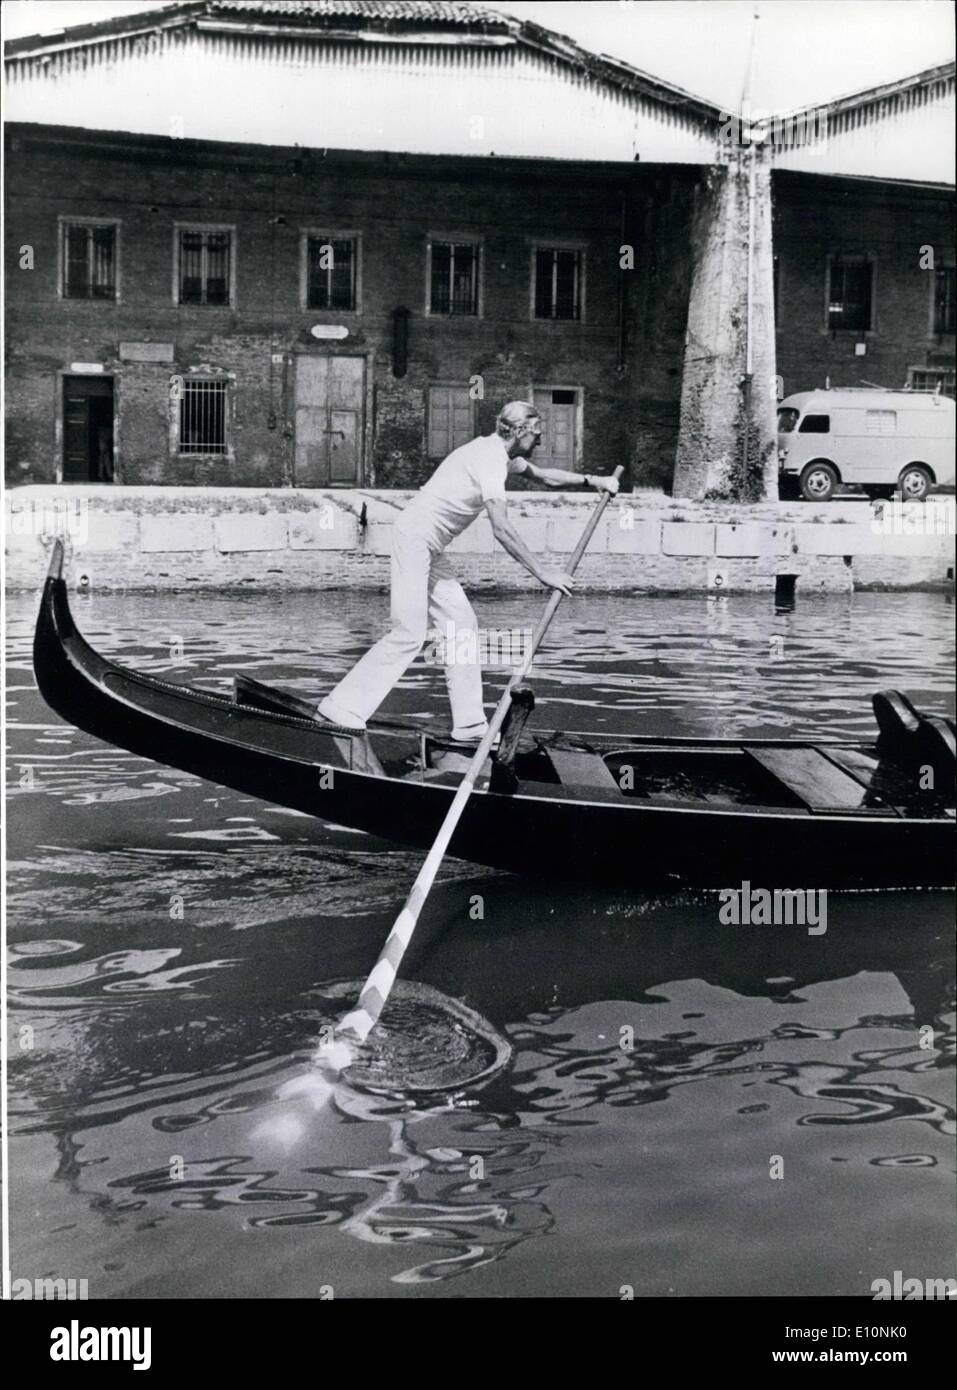 Jul. 07, 1973 - Journalist Wolf Mittler became honorary gondolier. No foreigner until now has had a chance to receive this title except him yet. The well known German radio journalist from Munich was now able to show his friends proudly his new gondola license upon returning from Venice. After finishing a feature story on gondolas in the city of the lagoon, he simply could not resist temptation to try to become a genuine gondolier. Successfully he has passed the strict examinations by a commission of eight gondoliers. Now Wolf Mittler is able to move the 11 Stock Photo